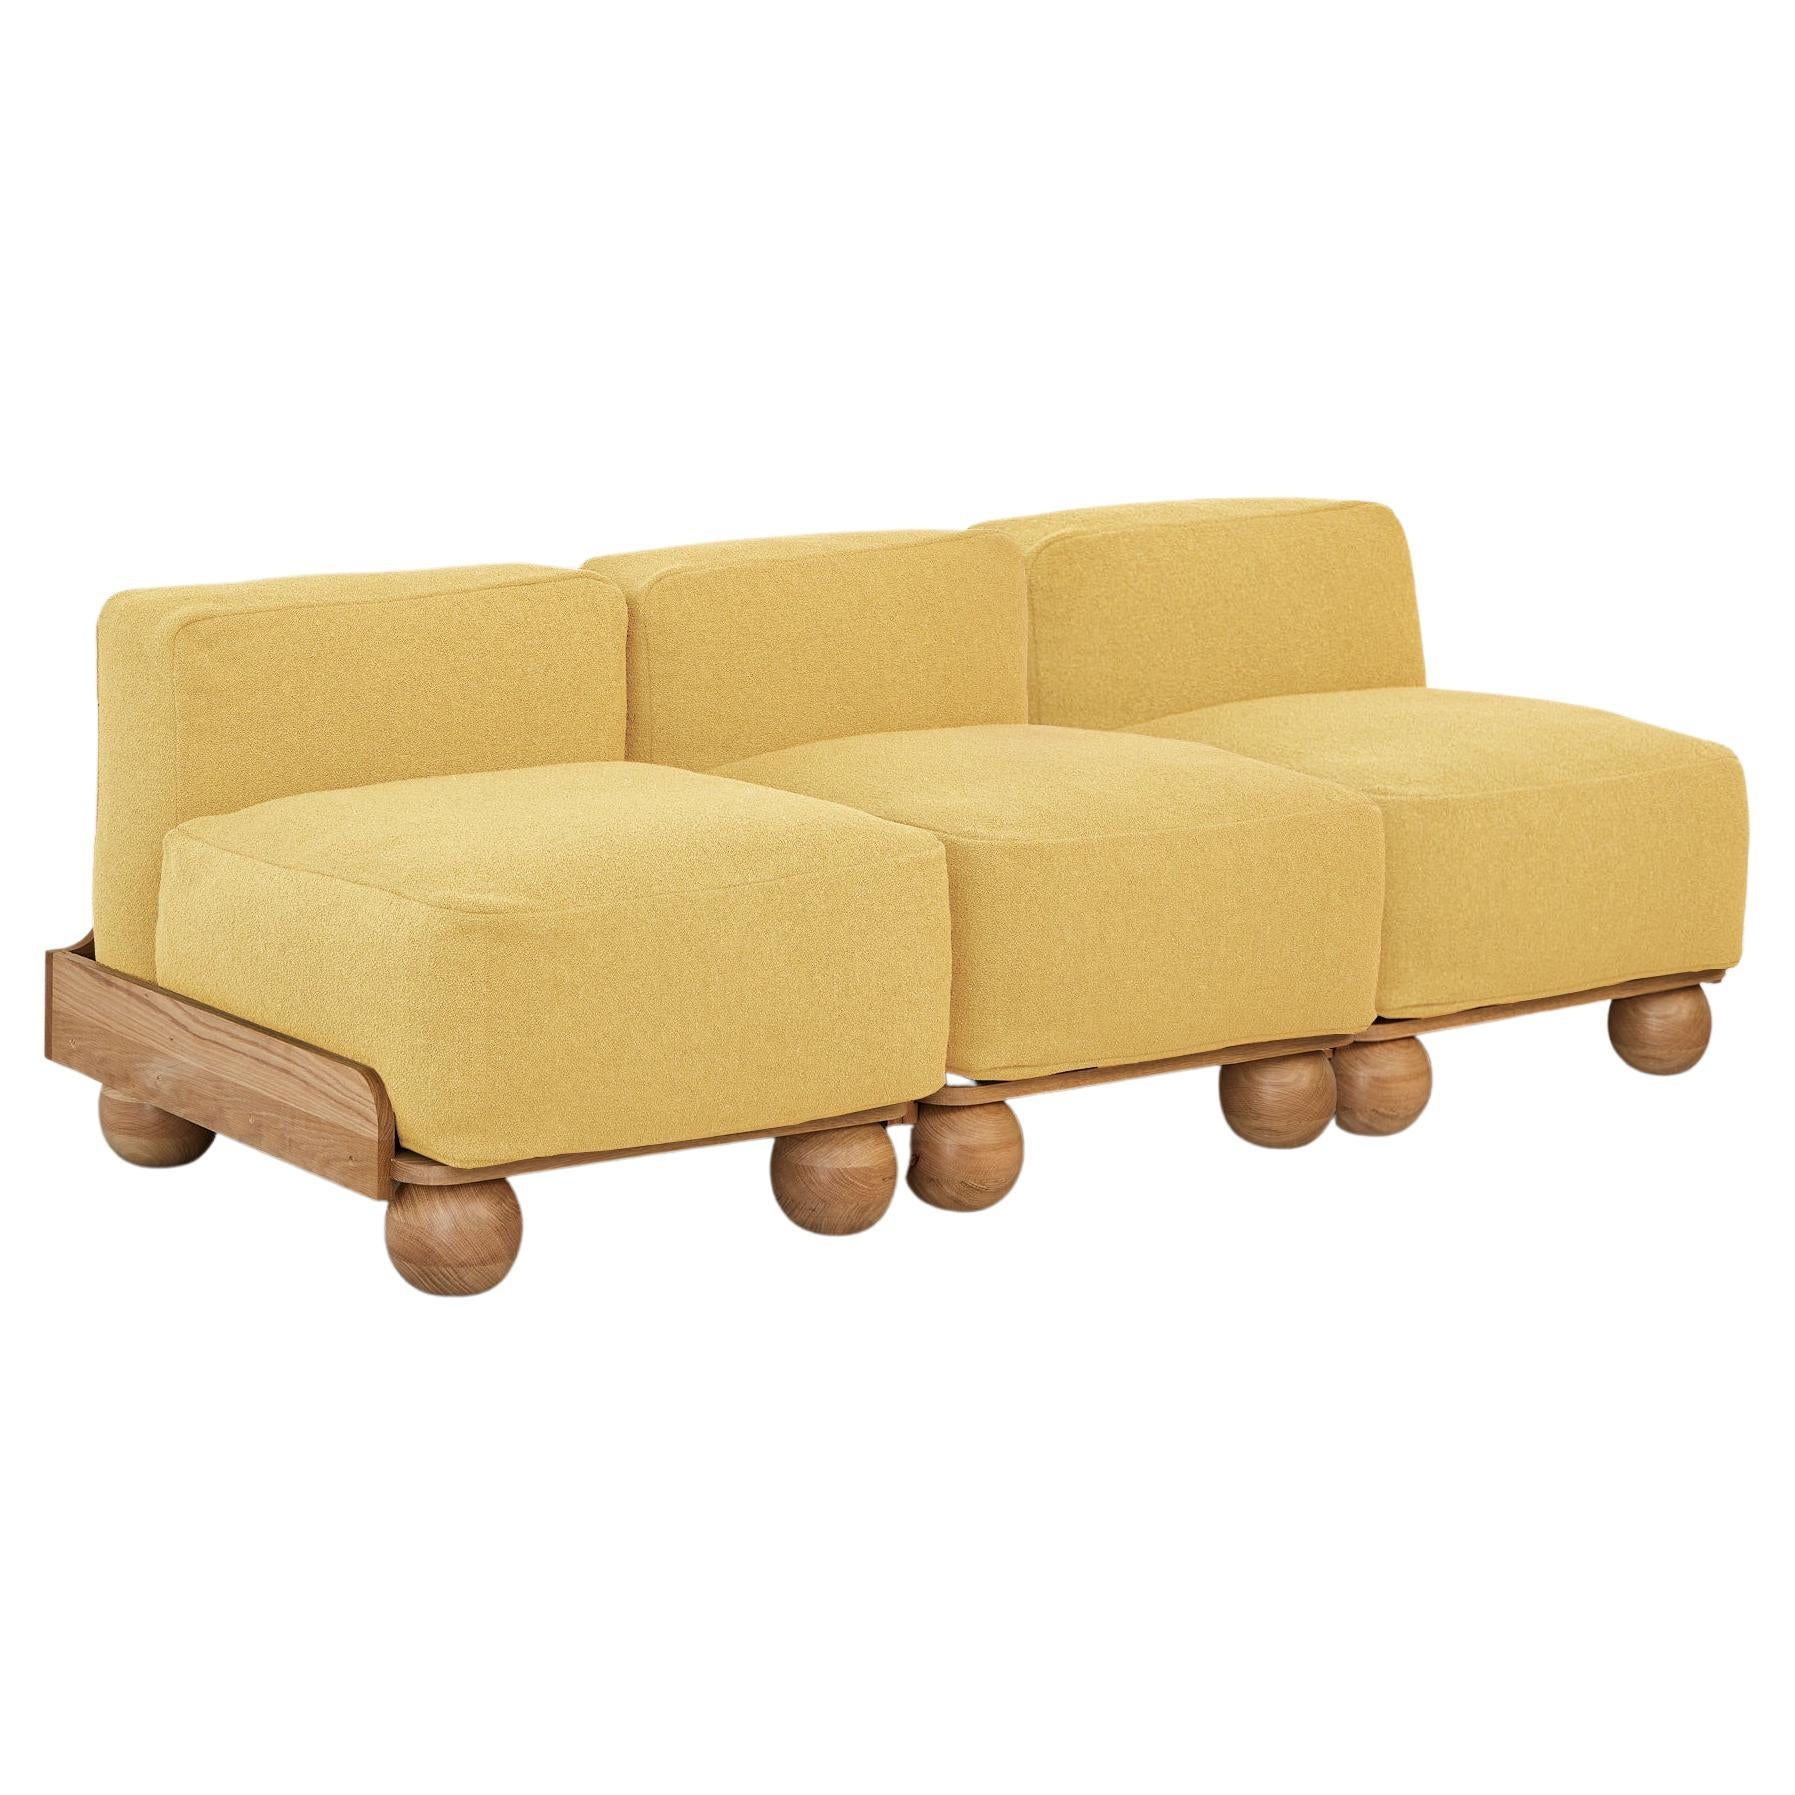 Cove 3.5 Seater Slipper in Straw Yellow For Sale